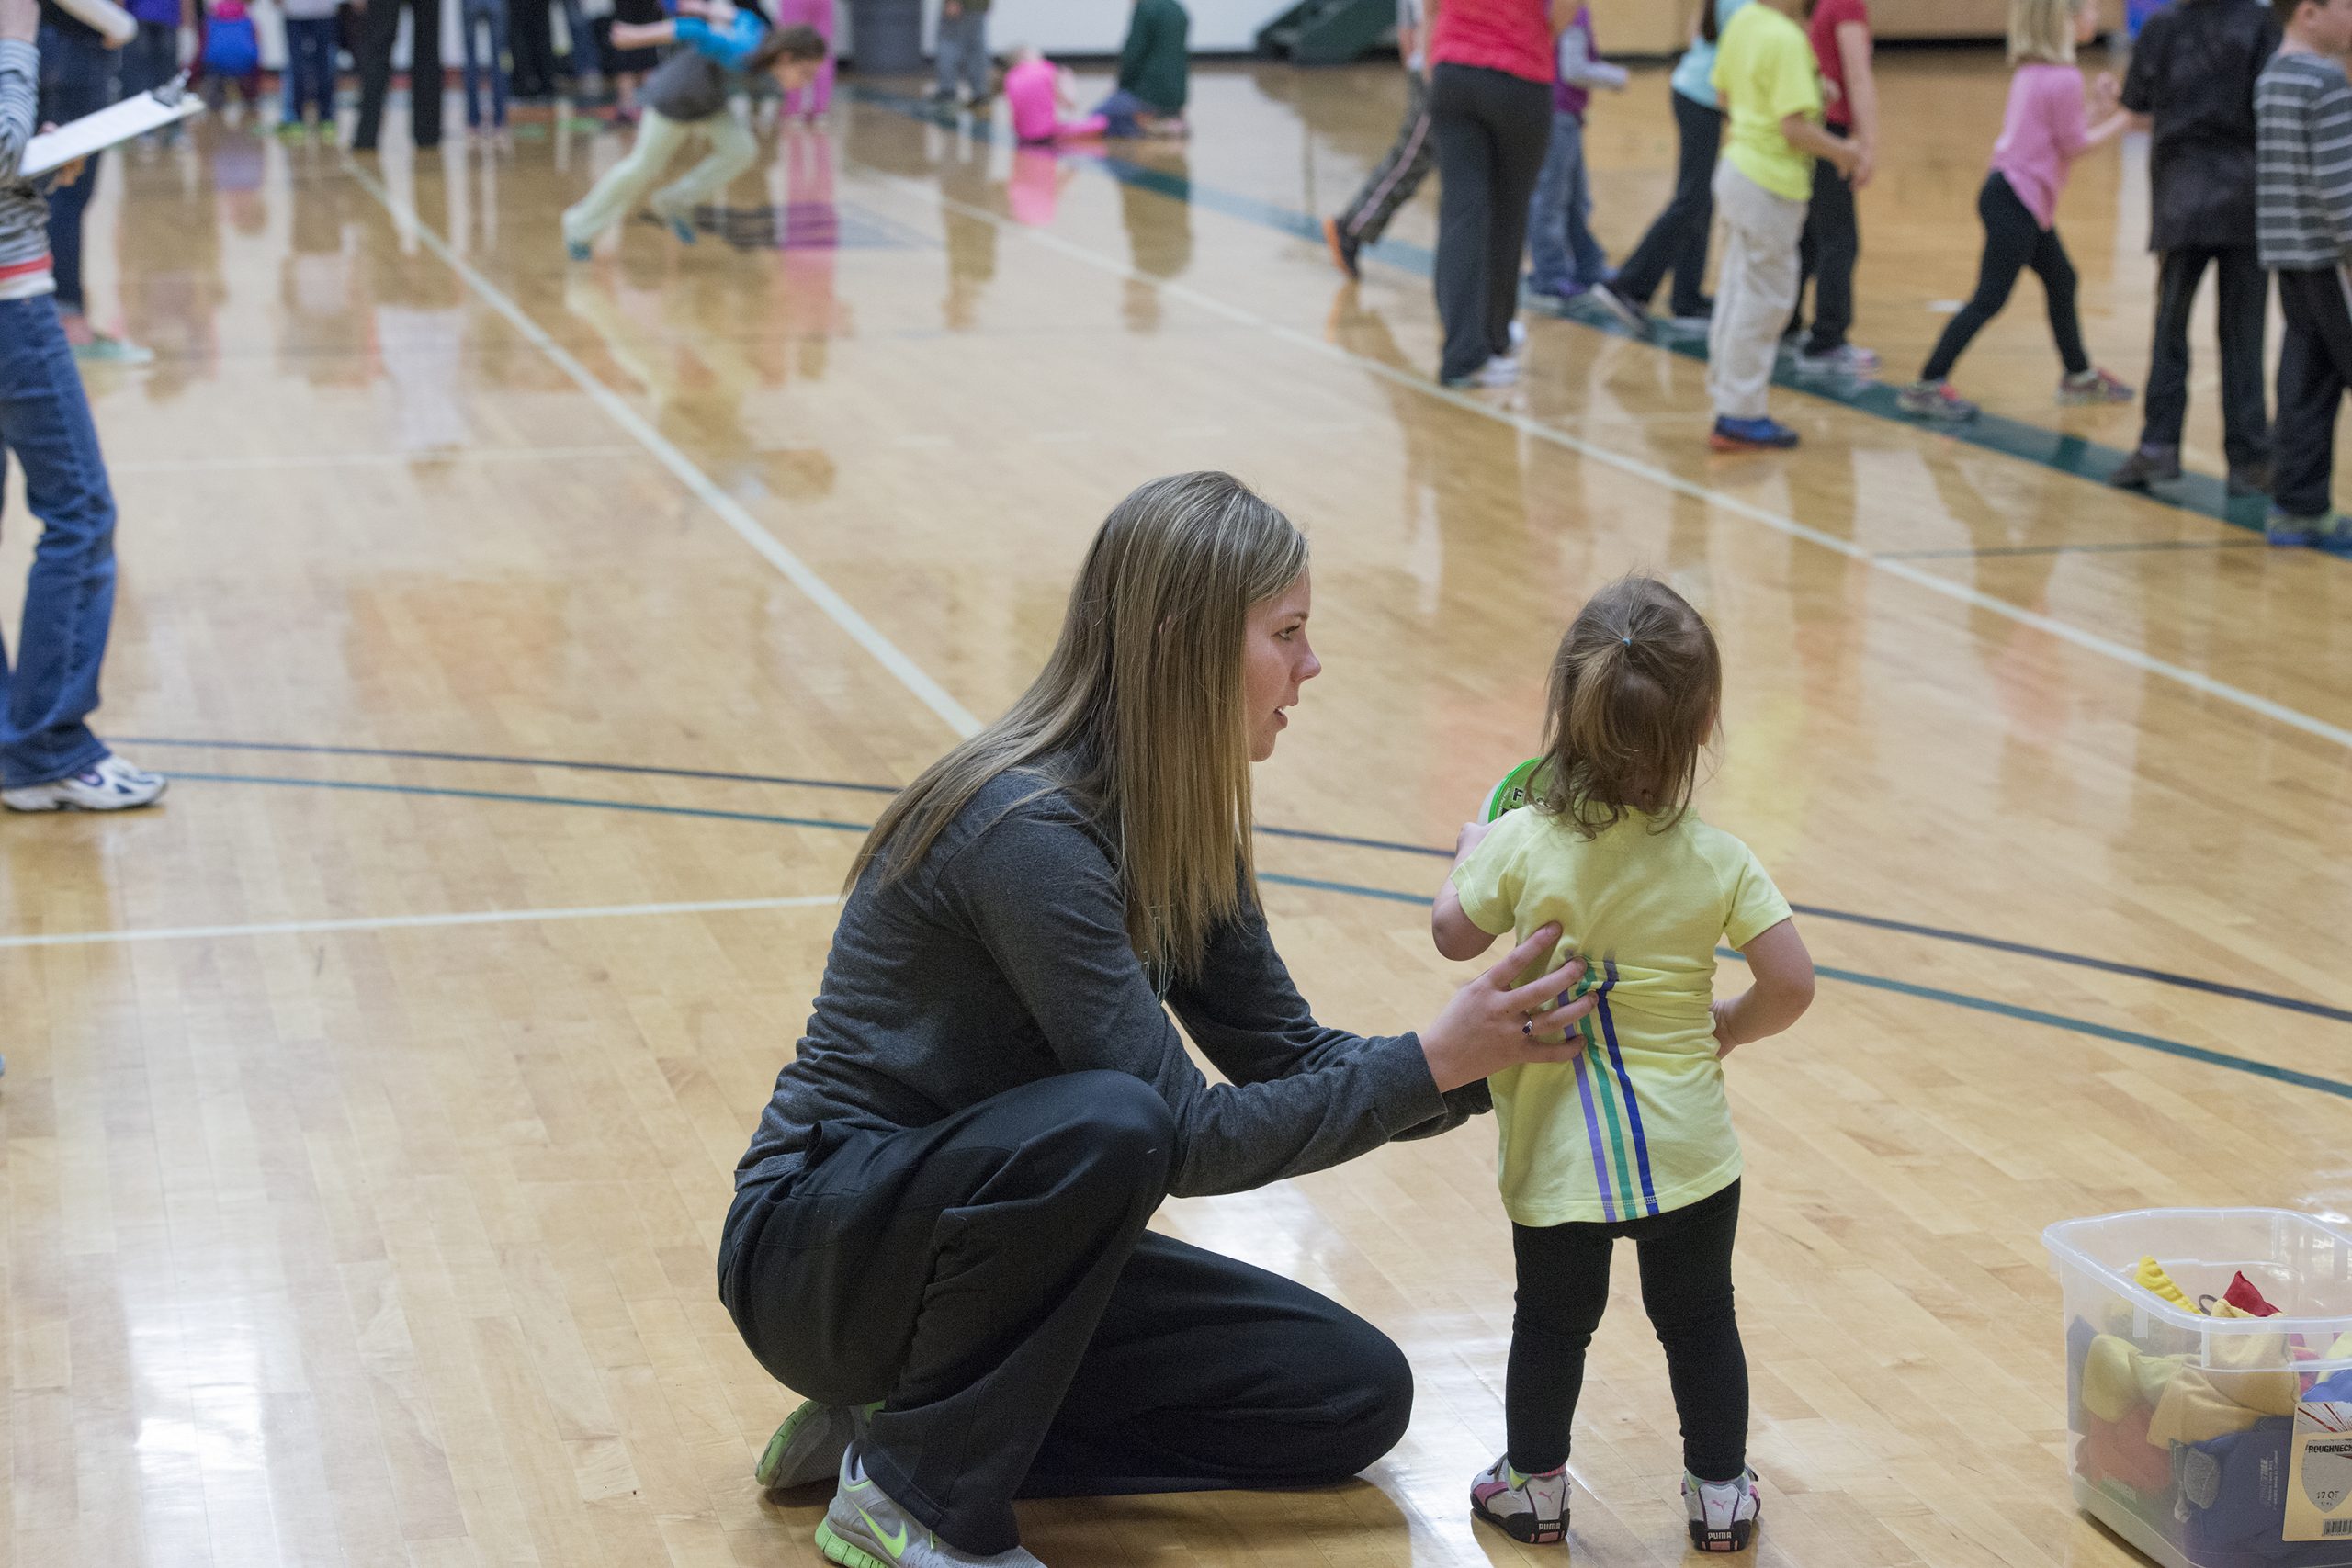 A BSU student helping a young child during Beaver Fitness Day